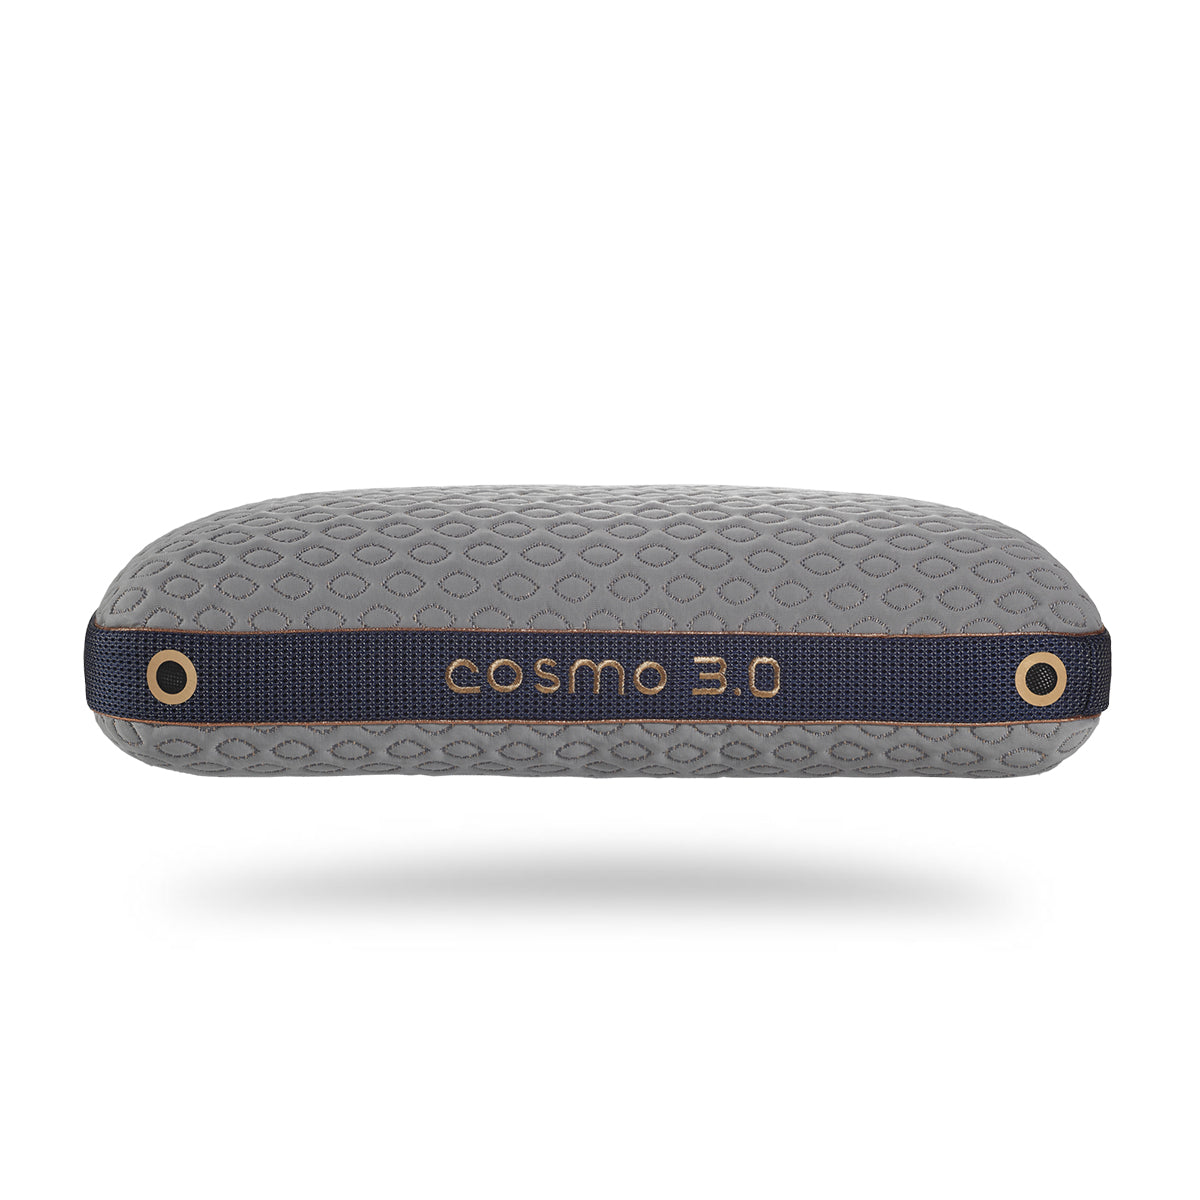 Bedgear Cosmo Performance Pillow 3.0